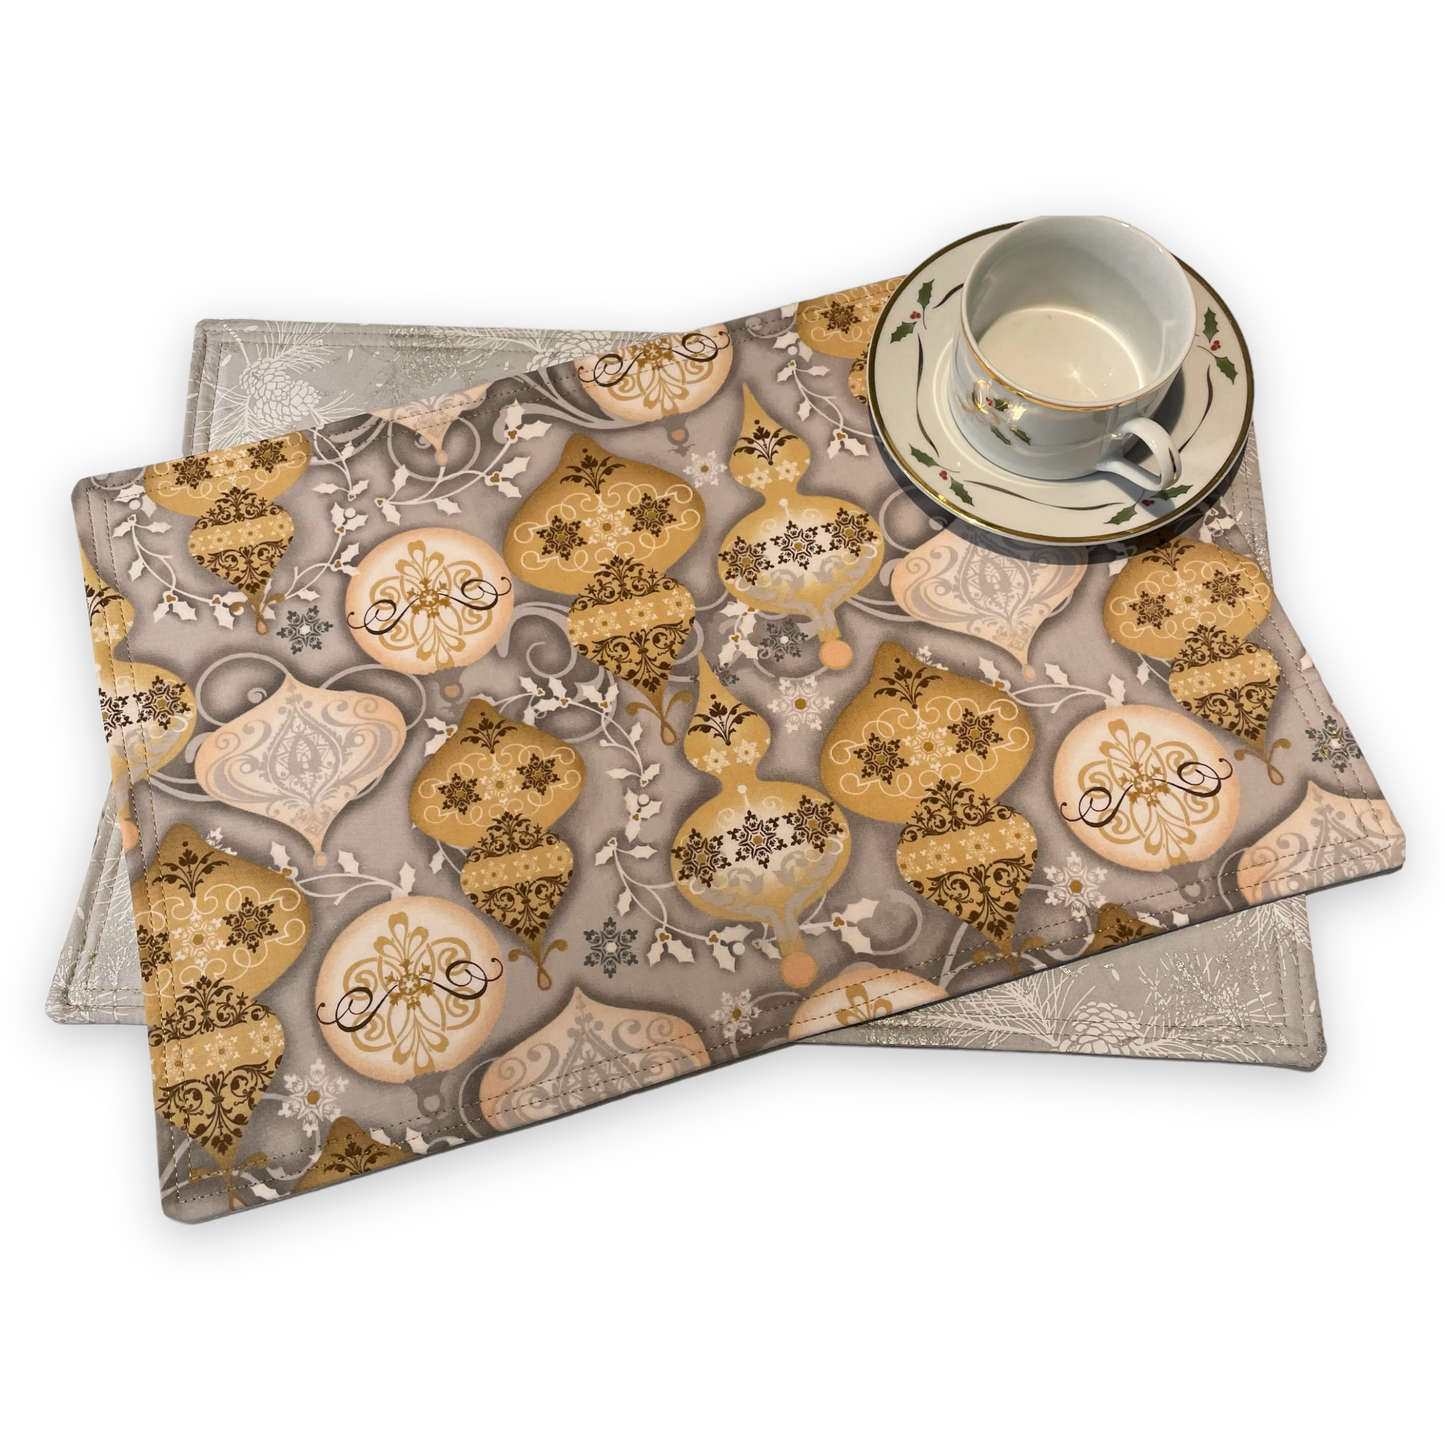 Reversible Christmas Placemats Featuring Gold and Silver Ornaments on one side and Silver Pinecones on the opposite side. Luxurious handmade Christmas Table Placemats. Part of a collection by Home Stitchery Decor.  Check out all the mix and match items online.